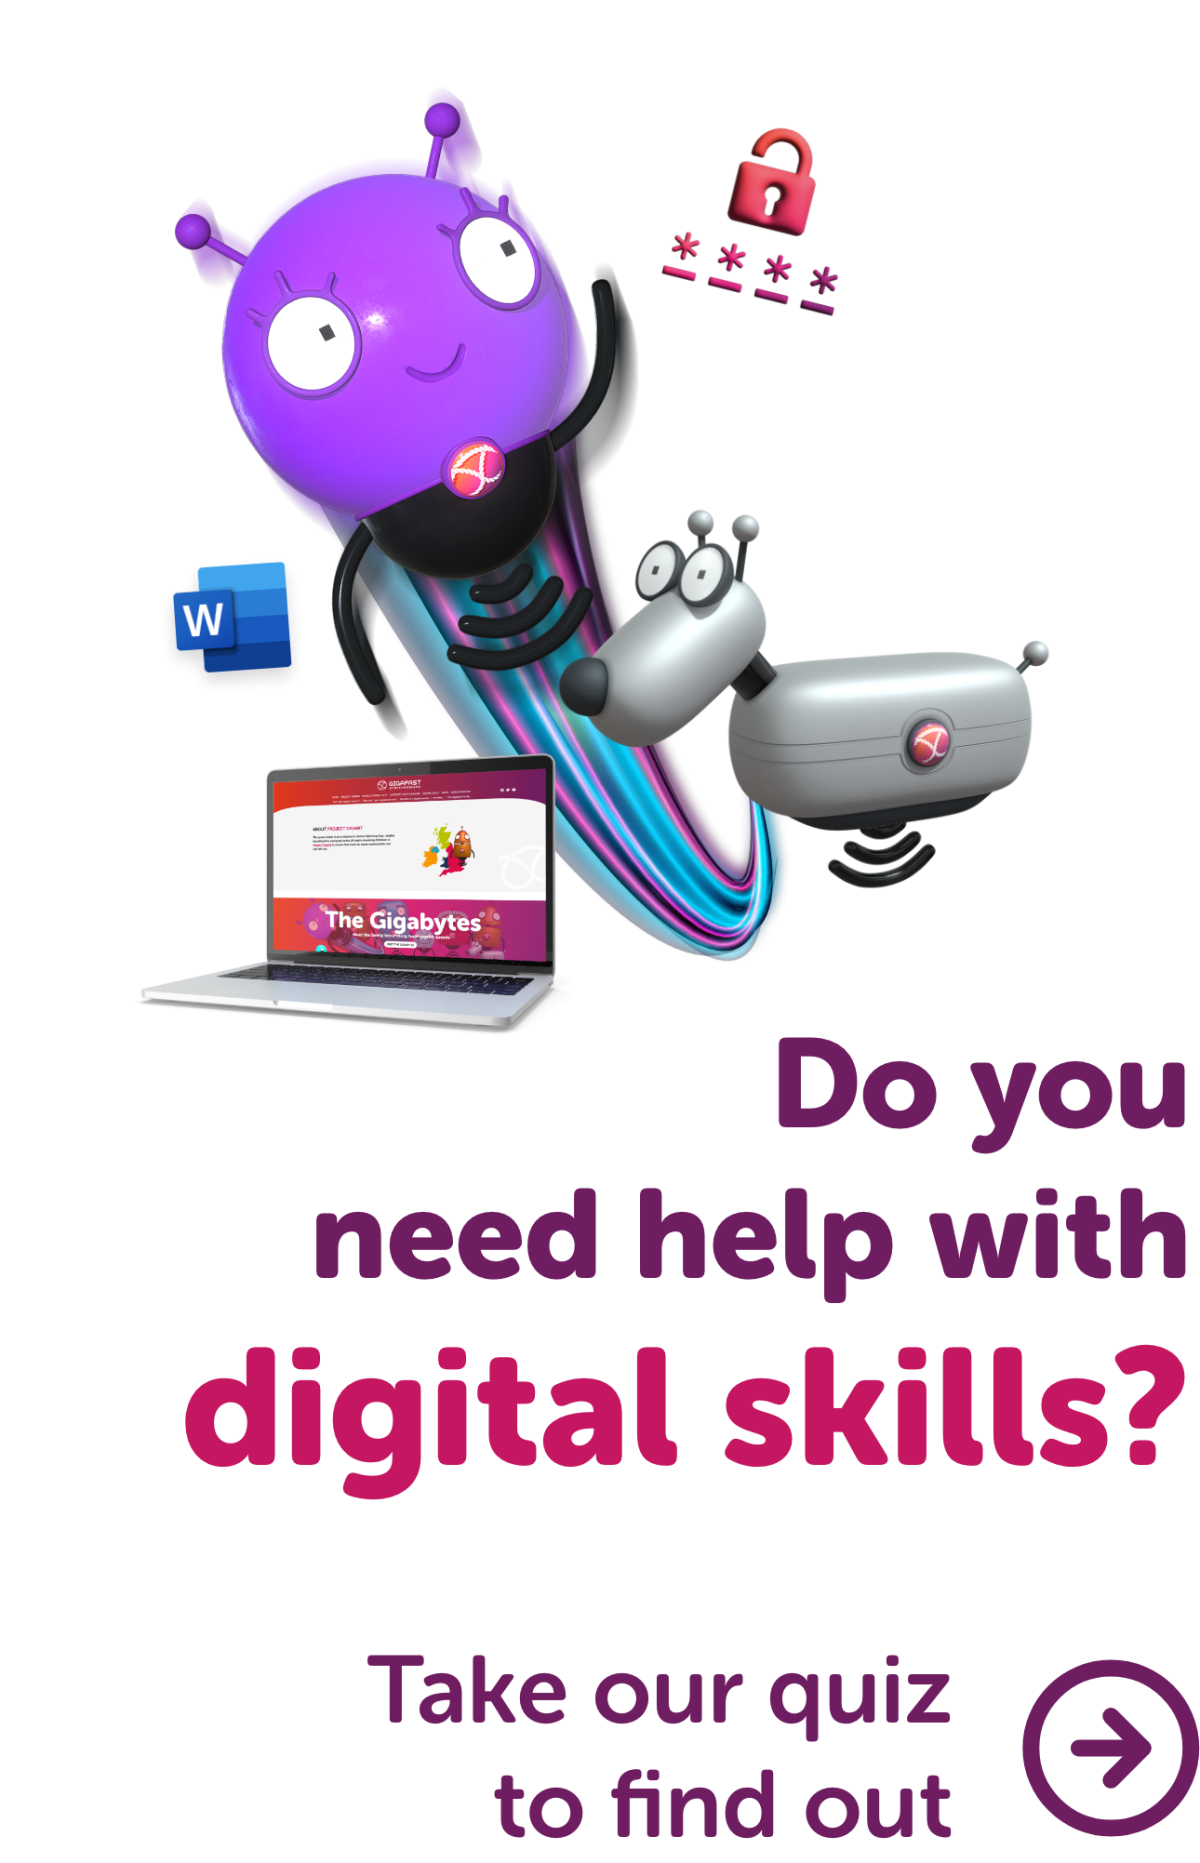 Do you need help with digital skills? Take our quiz to find out